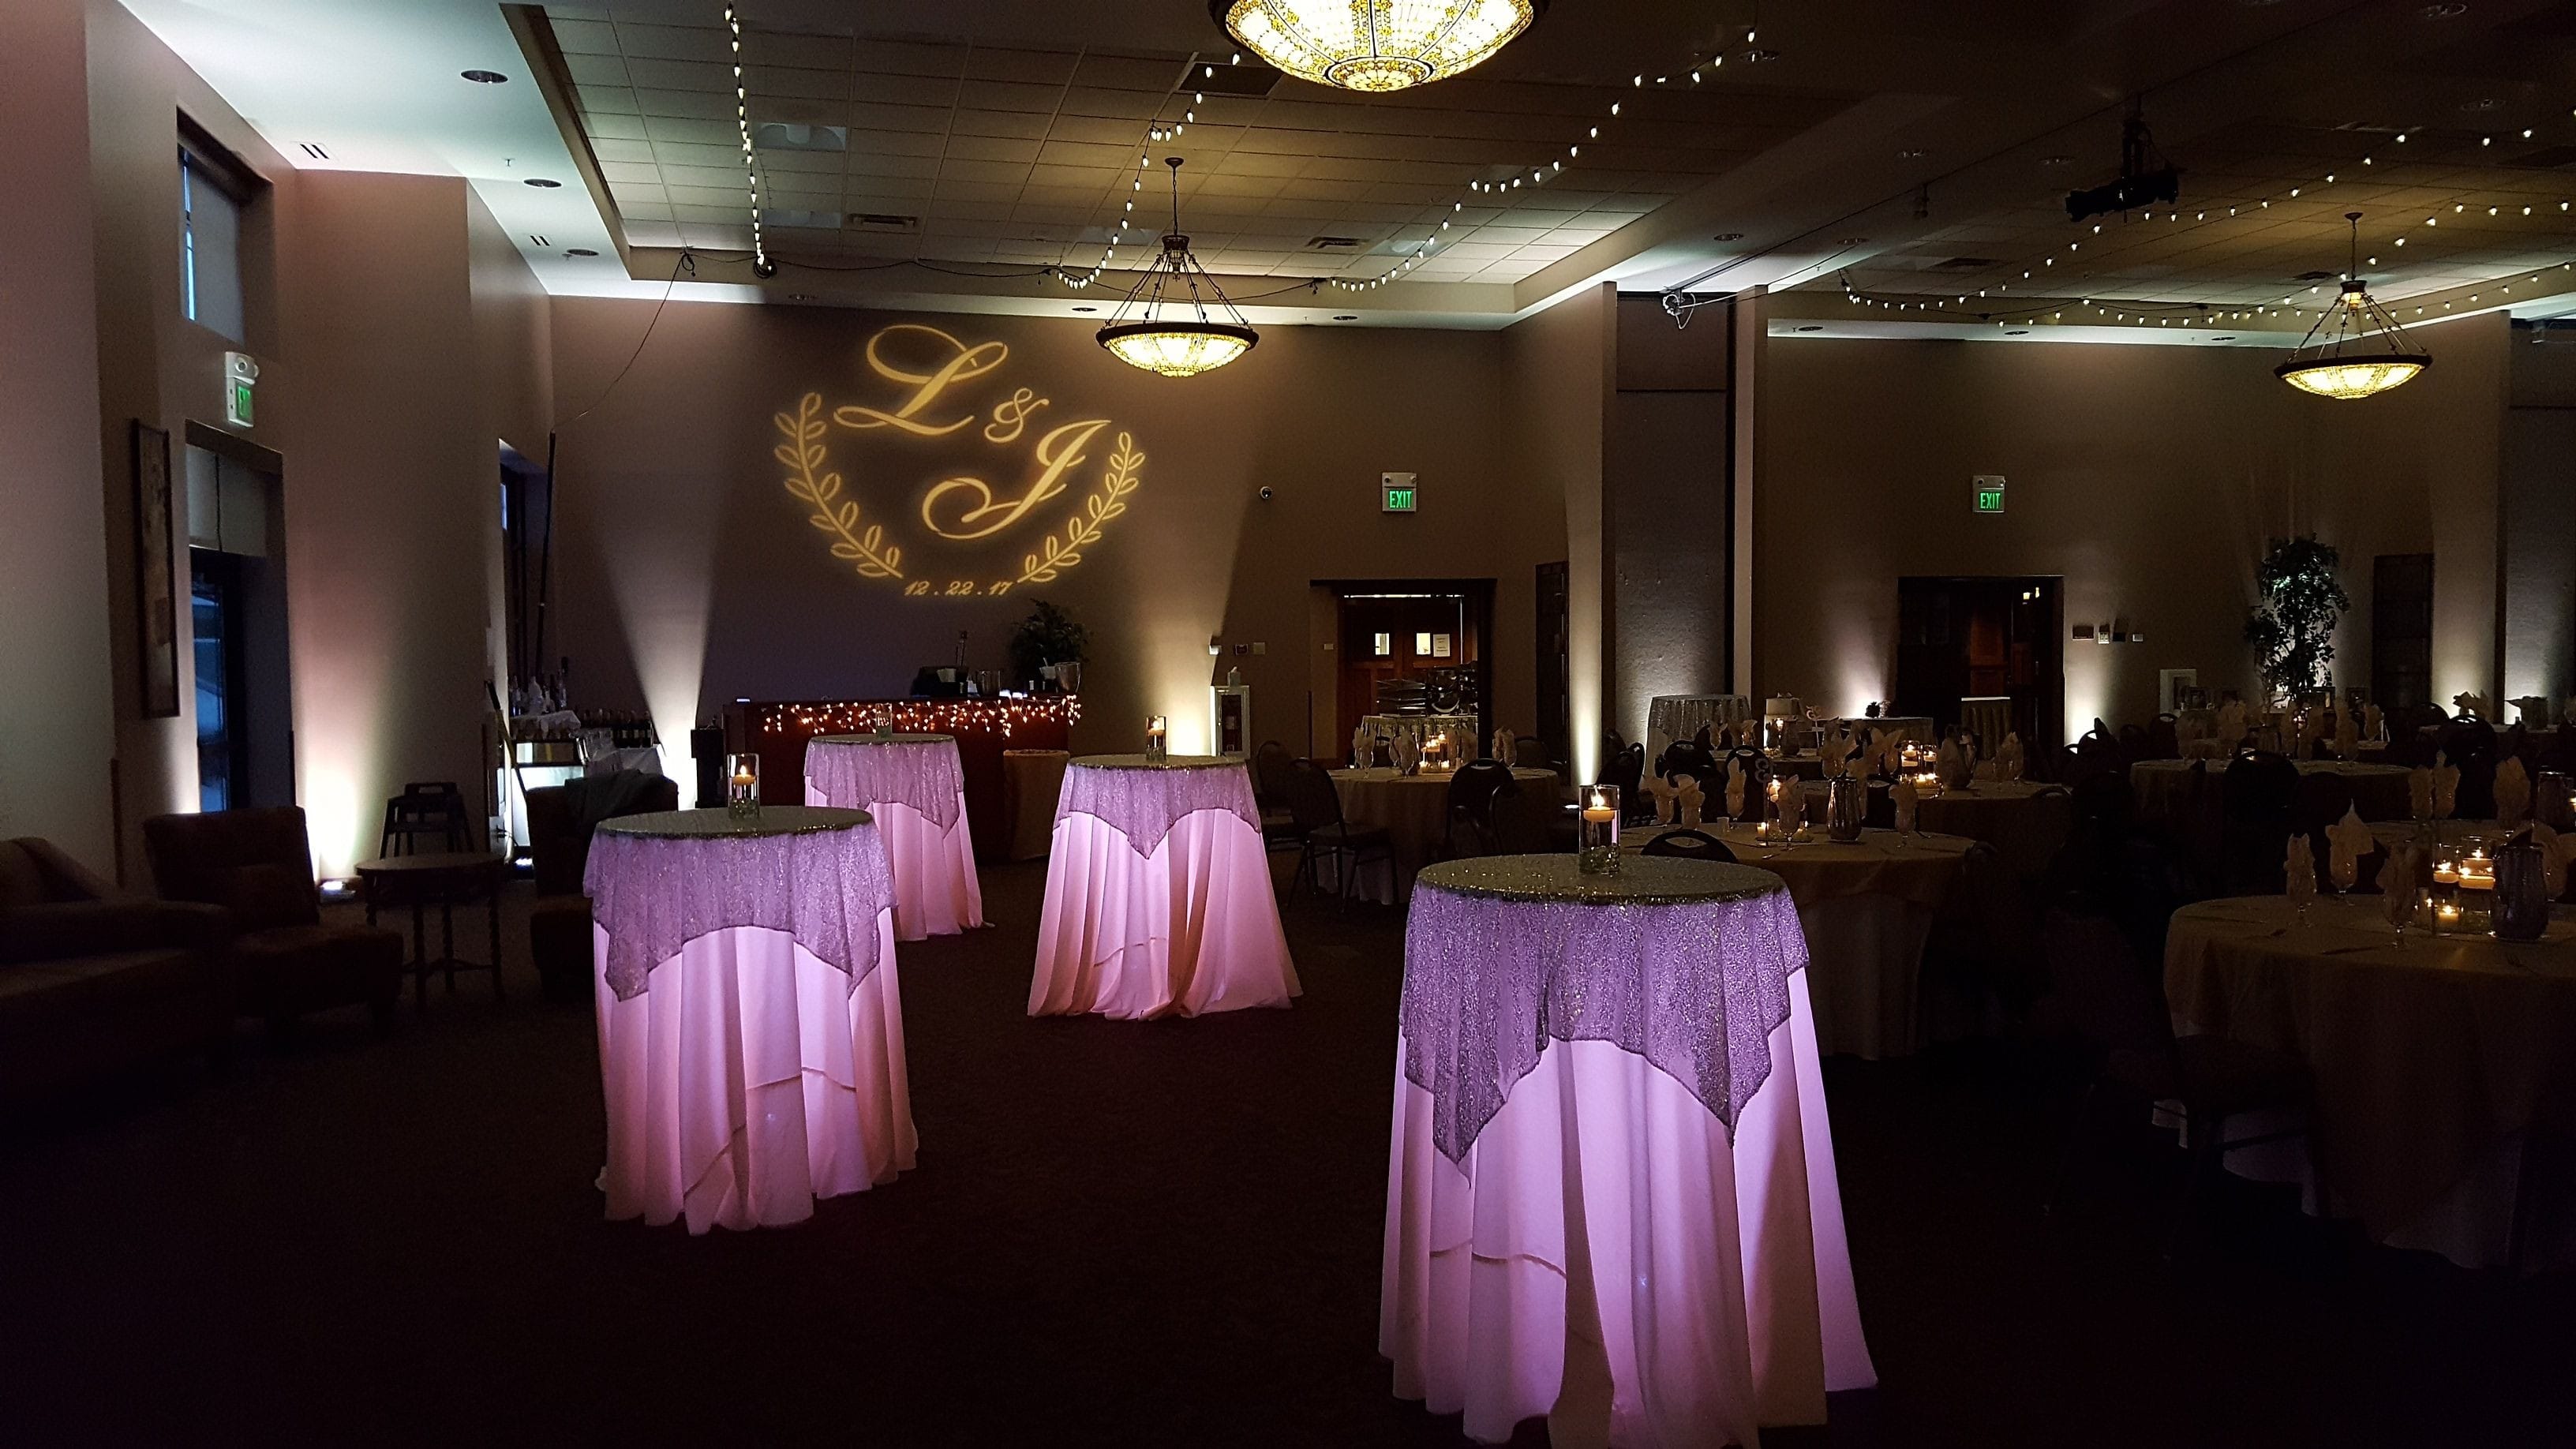 Wedding lighting at the Timberlake Lodge in Grand Rapids, MN. Up lighting in champagne white.